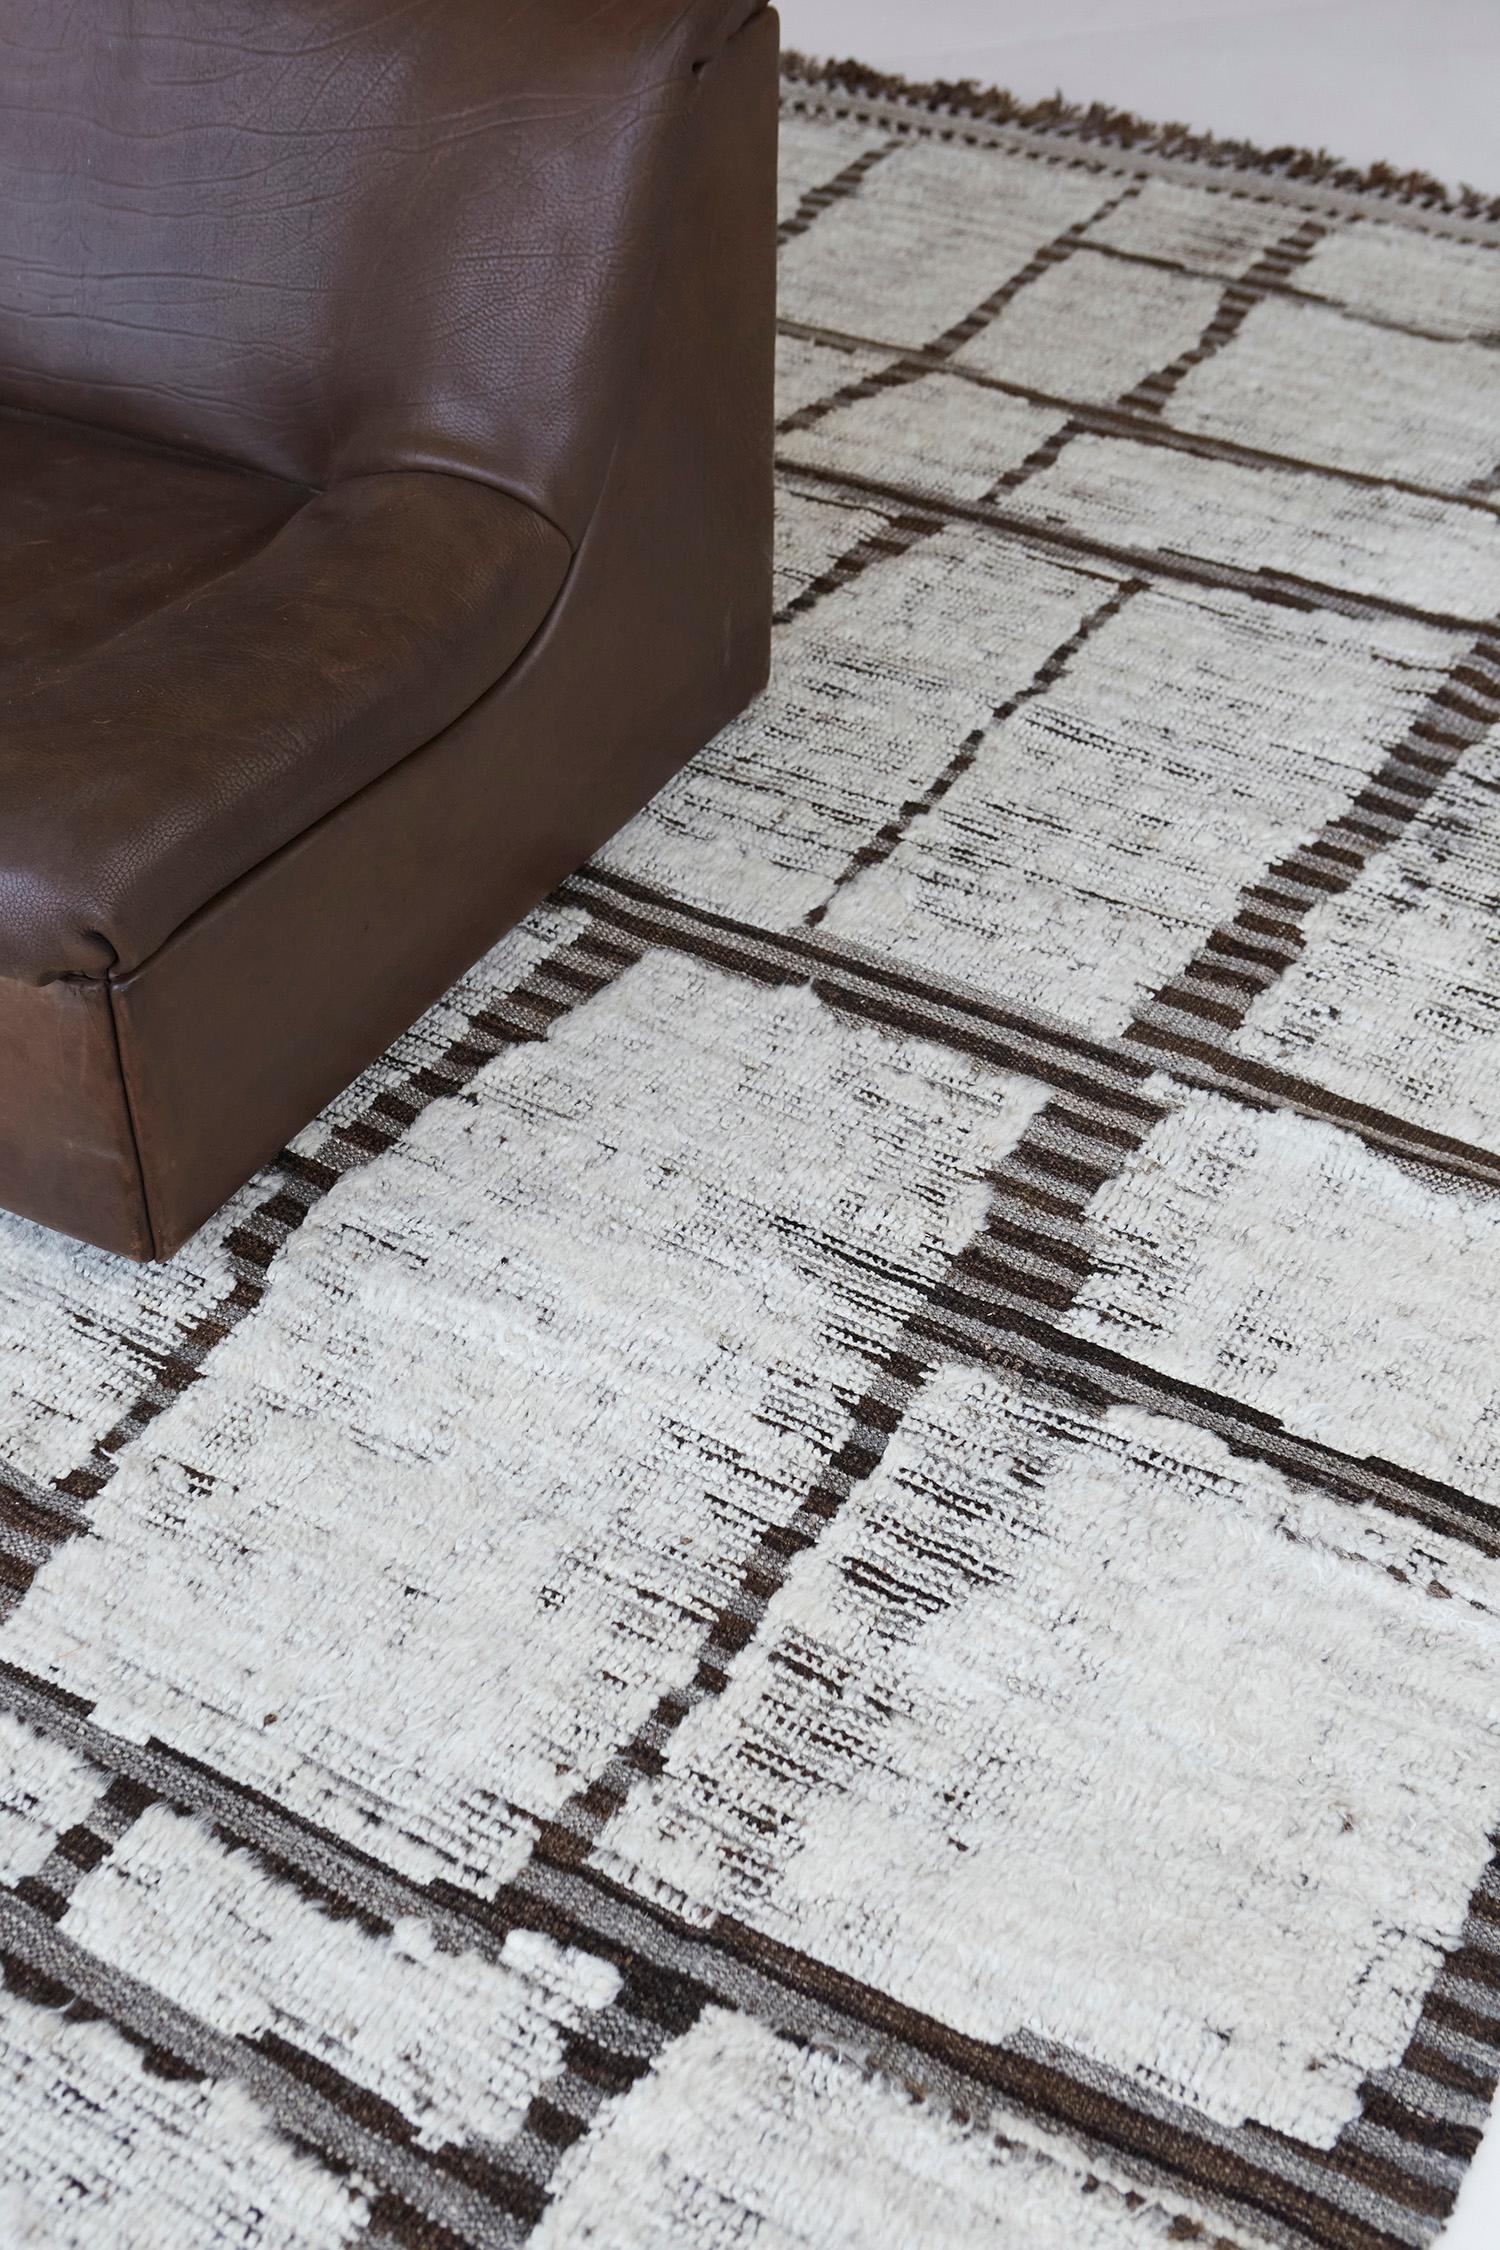 Maziere is a handwoven wool piece with unique design elements that mirror roman masonry. This luxurious striped brown and cream pile weave shag makes for the perfect contemporary. Maziere is designed in Los Angeles for the modern design